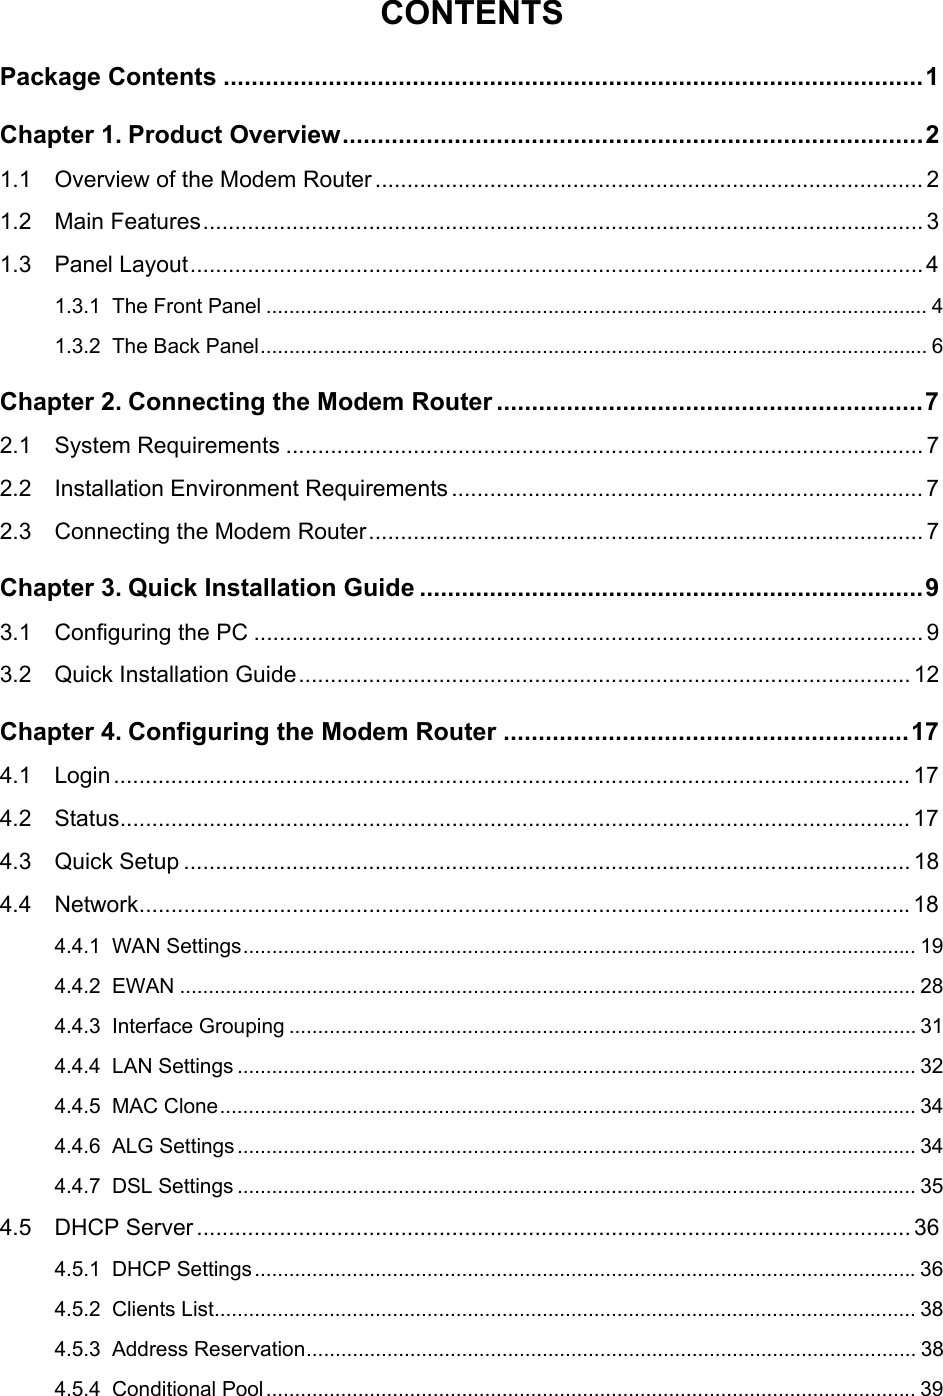  CONTENTS Package Contents ....................................................................................................1 Chapter 1. Product Overview...................................................................................2 1.1 Overview of the Modem Router ...................................................................................... 2 1.2 Main Features................................................................................................................. 3 1.3 Panel Layout...................................................................................................................4 1.3.1 The Front Panel ................................................................................................................... 4 1.3.2 The Back Panel.................................................................................................................... 6 Chapter 2. Connecting the Modem Router .............................................................7 2.1 System Requirements .................................................................................................... 7 2.2 Installation Environment Requirements .......................................................................... 7 2.3 Connecting the Modem Router....................................................................................... 7 Chapter 3. Quick Installation Guide ........................................................................9 3.1 Configuring the PC ......................................................................................................... 9 3.2 Quick Installation Guide................................................................................................ 12 Chapter 4. Configuring the Modem Router ..........................................................17 4.1 Login............................................................................................................................. 17 4.2 Status............................................................................................................................ 17 4.3 Quick Setup .................................................................................................................. 18 4.4 Network.........................................................................................................................18 4.4.1 WAN Settings..................................................................................................................... 19 4.4.2 EWAN ................................................................................................................................ 28 4.4.3 Interface Grouping ............................................................................................................. 31 4.4.4 LAN Settings ...................................................................................................................... 32 4.4.5 MAC Clone......................................................................................................................... 34 4.4.6 ALG Settings...................................................................................................................... 34 4.4.7 DSL Settings ...................................................................................................................... 35 4.5 DHCP Server................................................................................................................ 36 4.5.1 DHCP Settings...................................................................................................................36 4.5.2 Clients List.......................................................................................................................... 38 4.5.3 Address Reservation.......................................................................................................... 38 4.5.4 Conditional Pool................................................................................................................. 39  